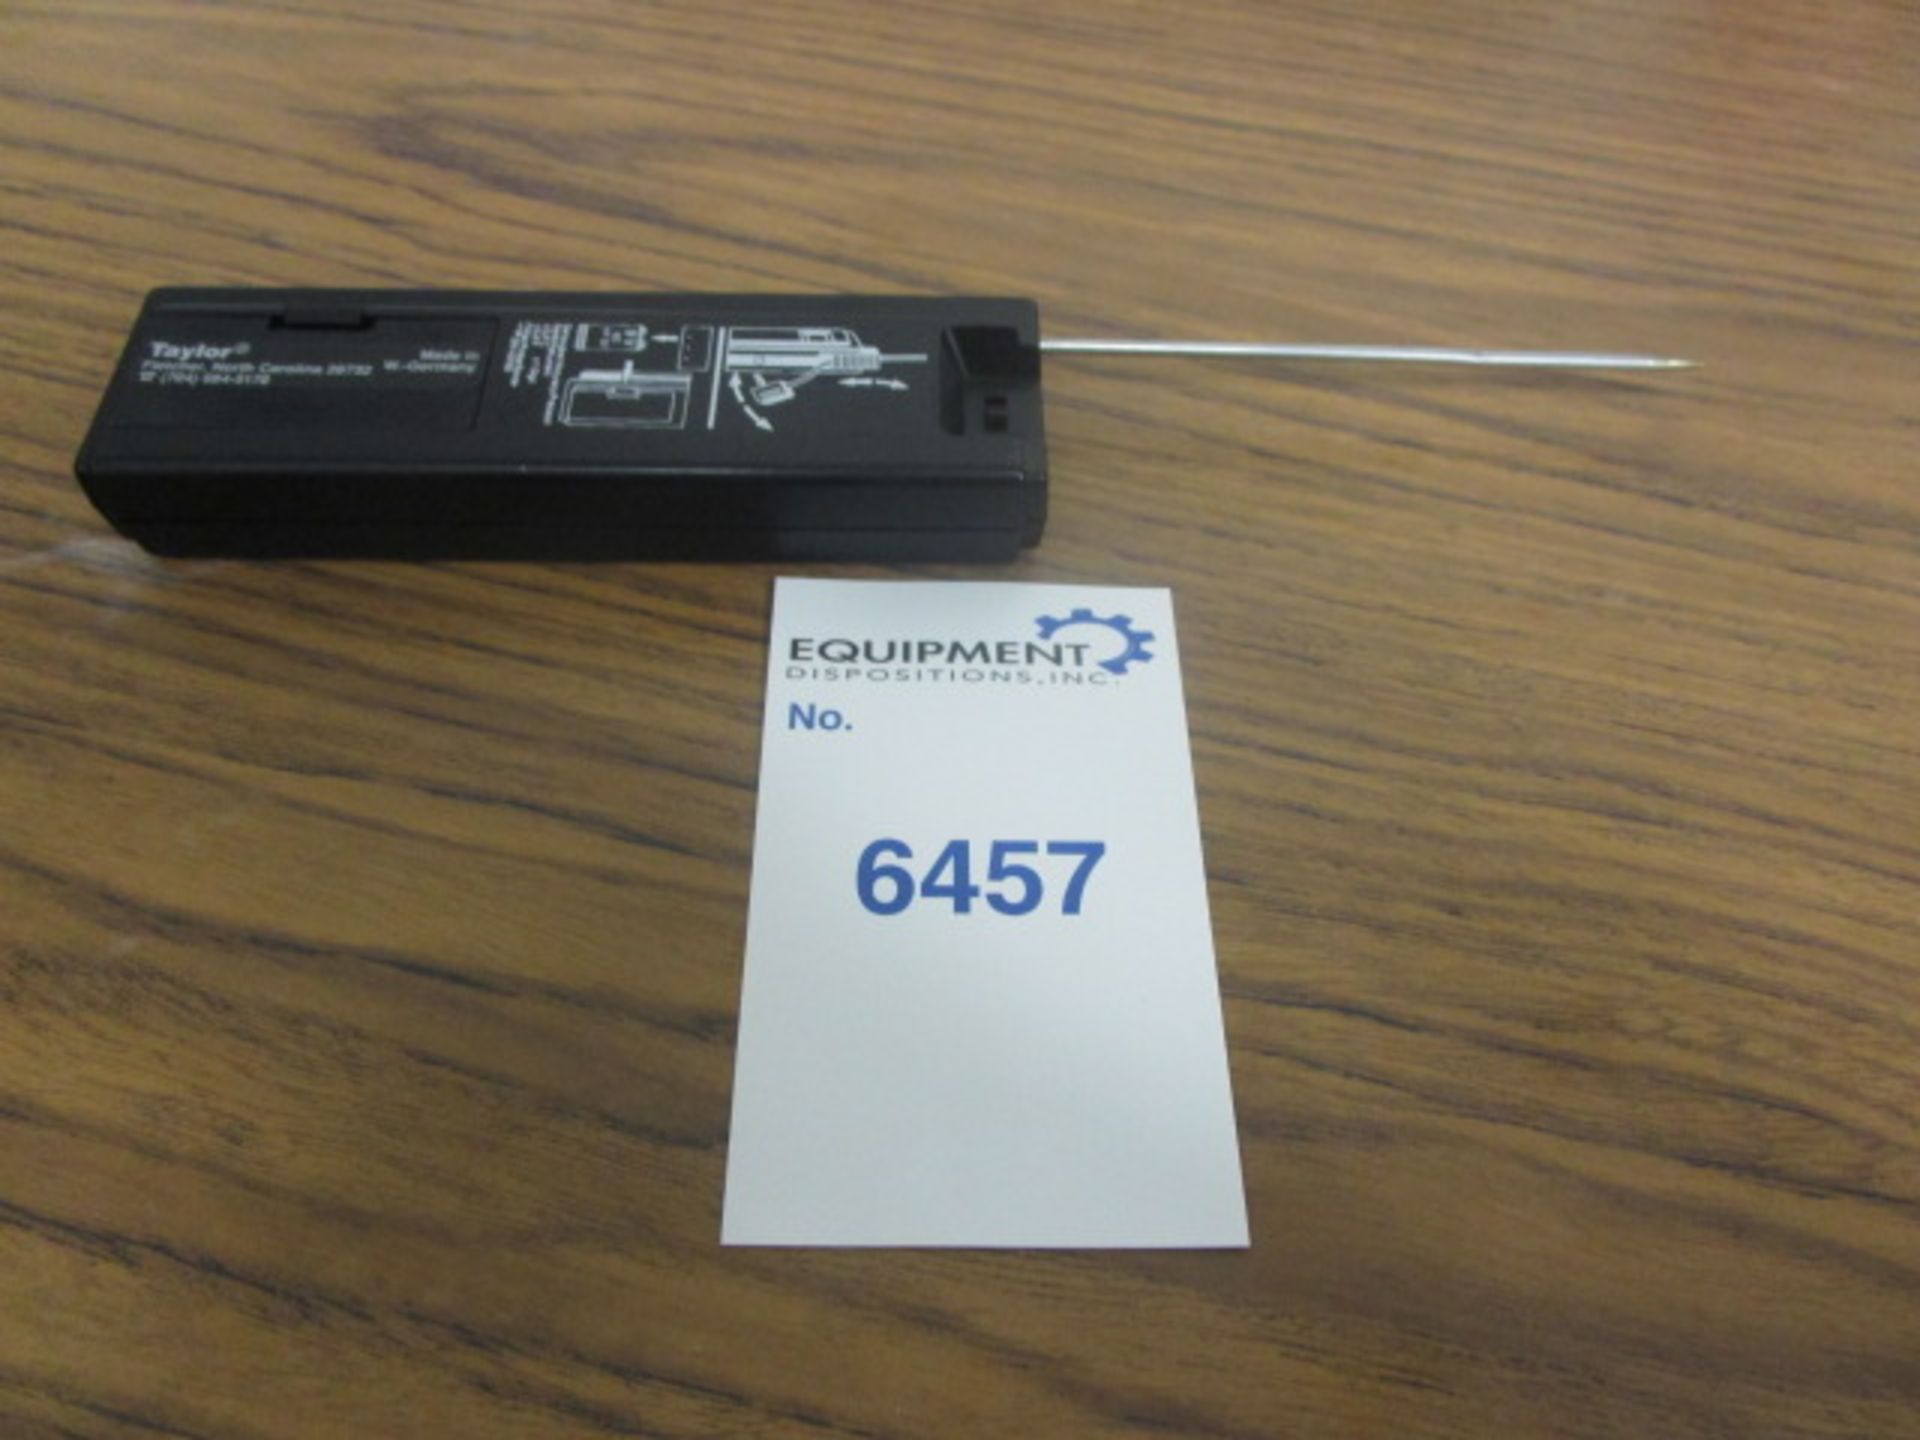 Taylor testo term thermometer 7200 - Image 3 of 5